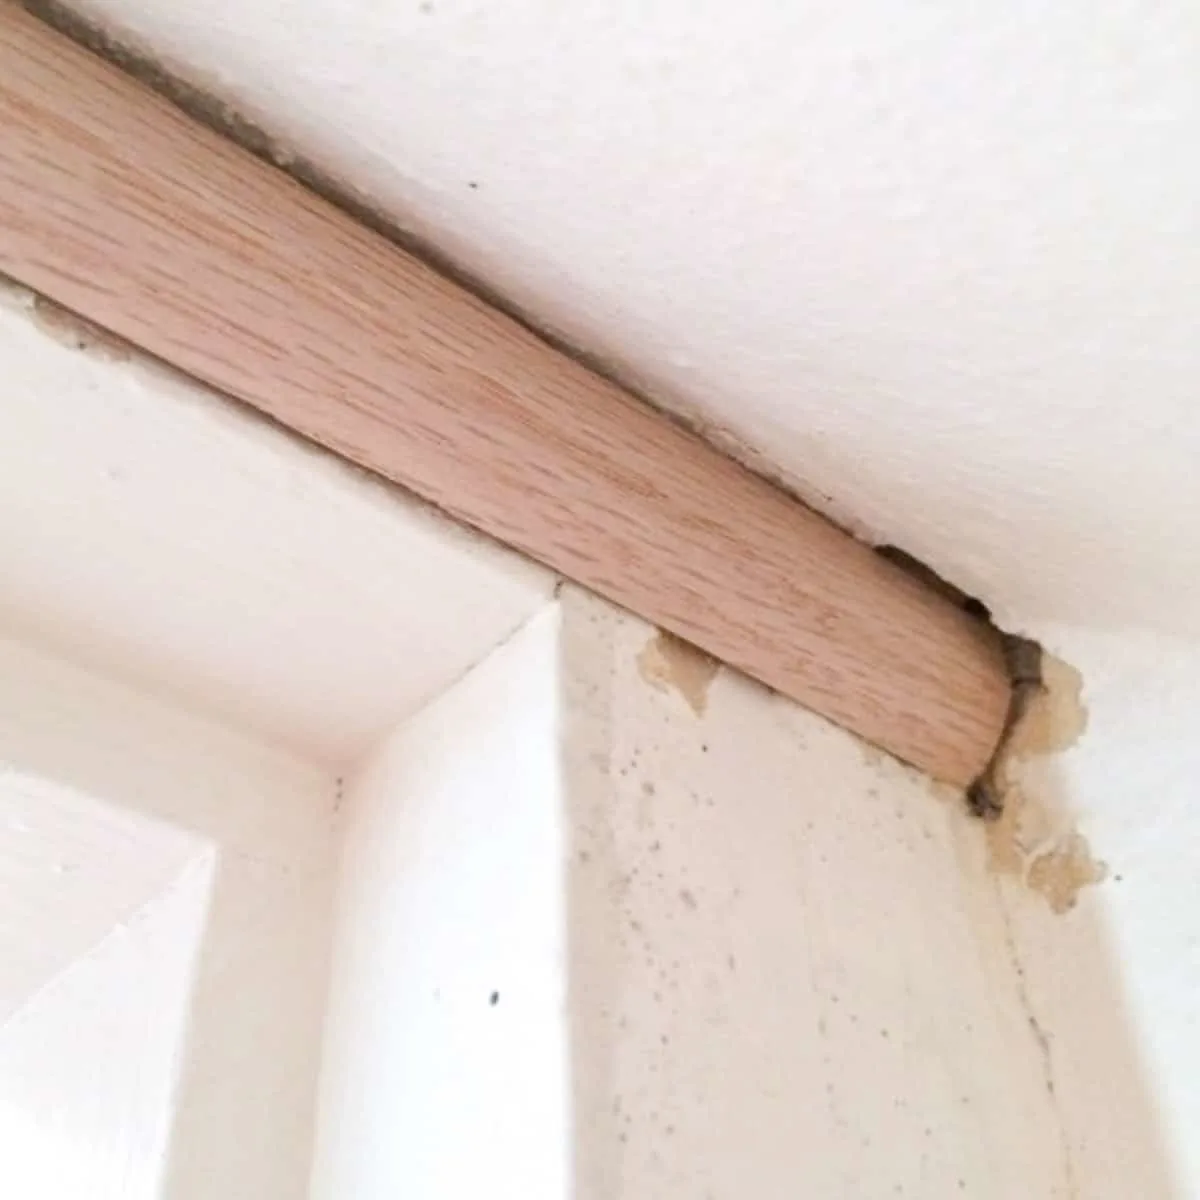 shoe molding above door on angled ceiling